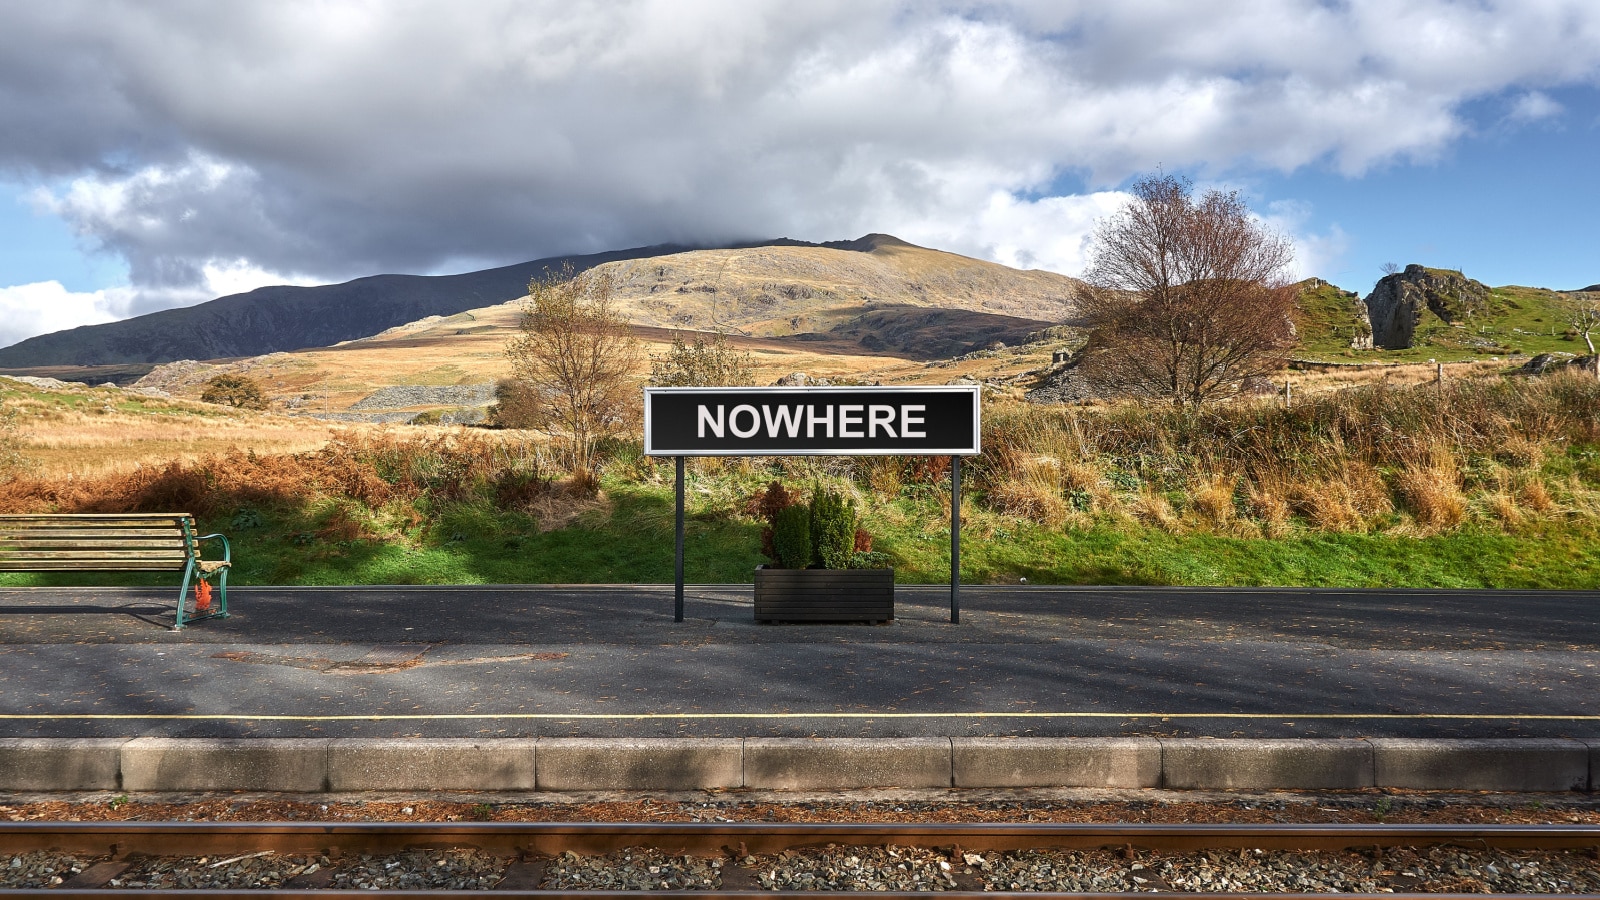 Nowhere descriptive station sign board on platform of remote railway station in rural mountain setting.